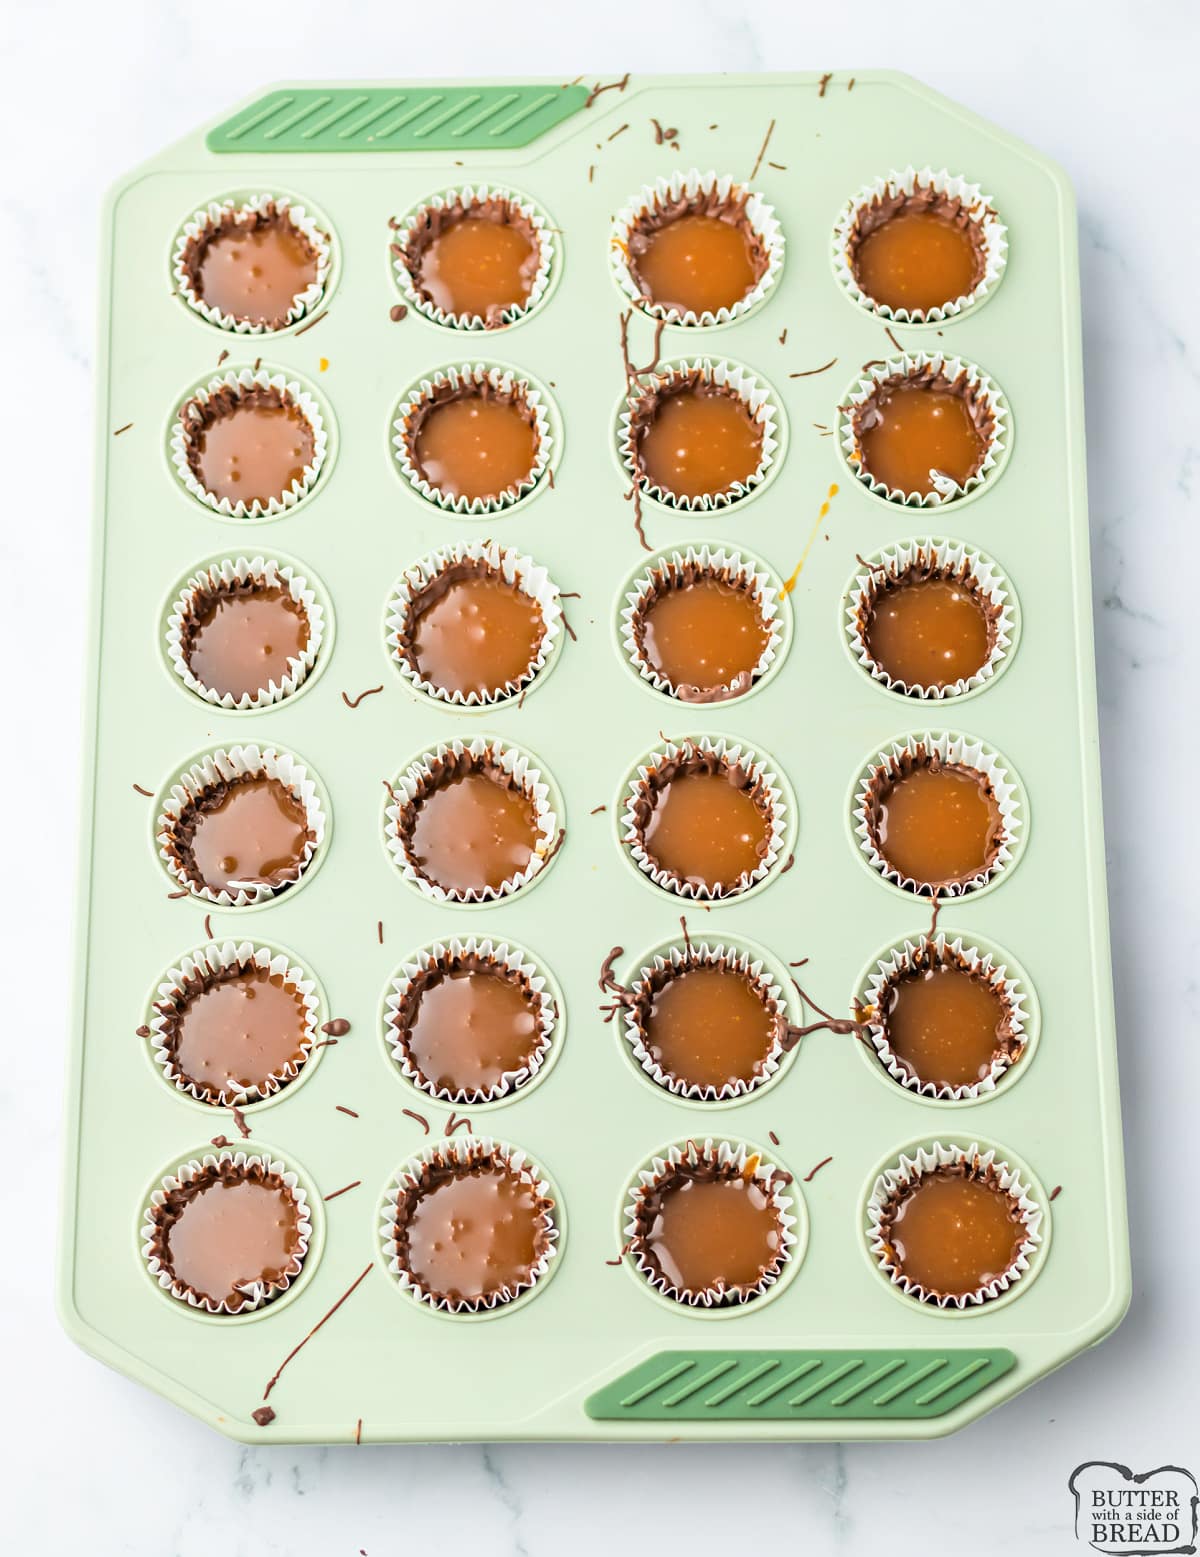 Adding caramel filling to chocolate cups.